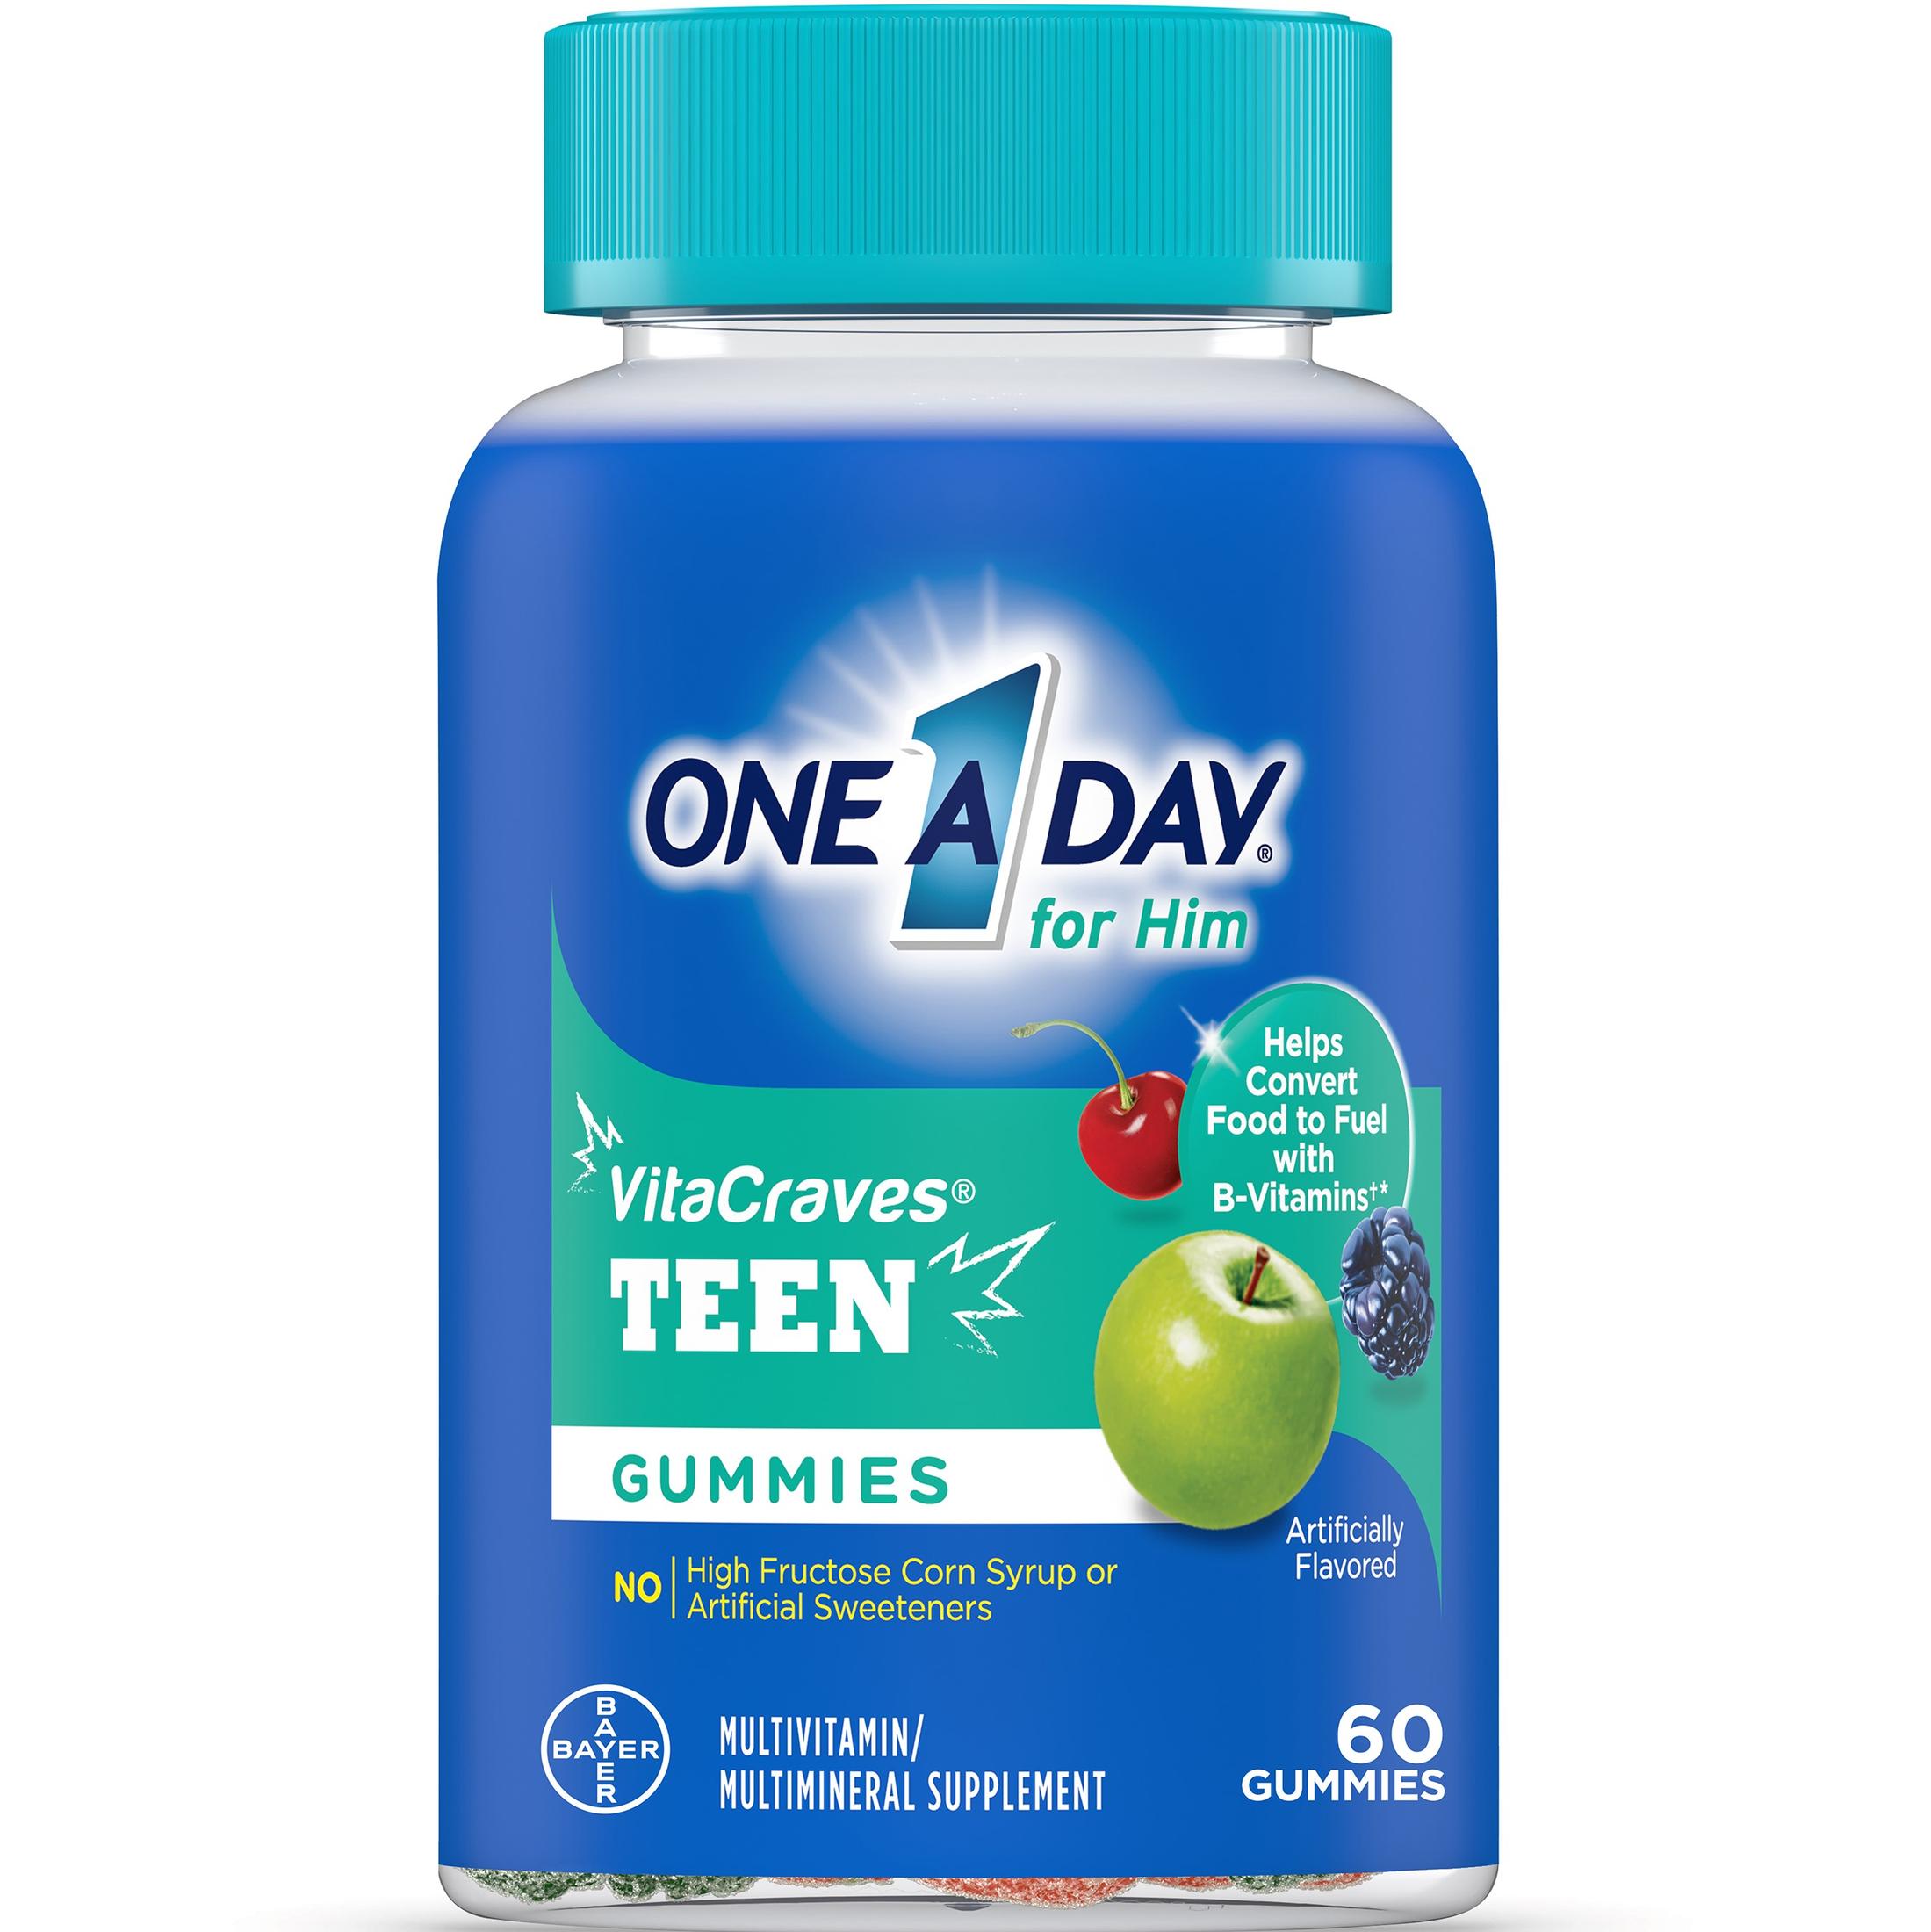 One A Day Teen For Him Multivitamin Gummies, 60 Count - image 2 of 8